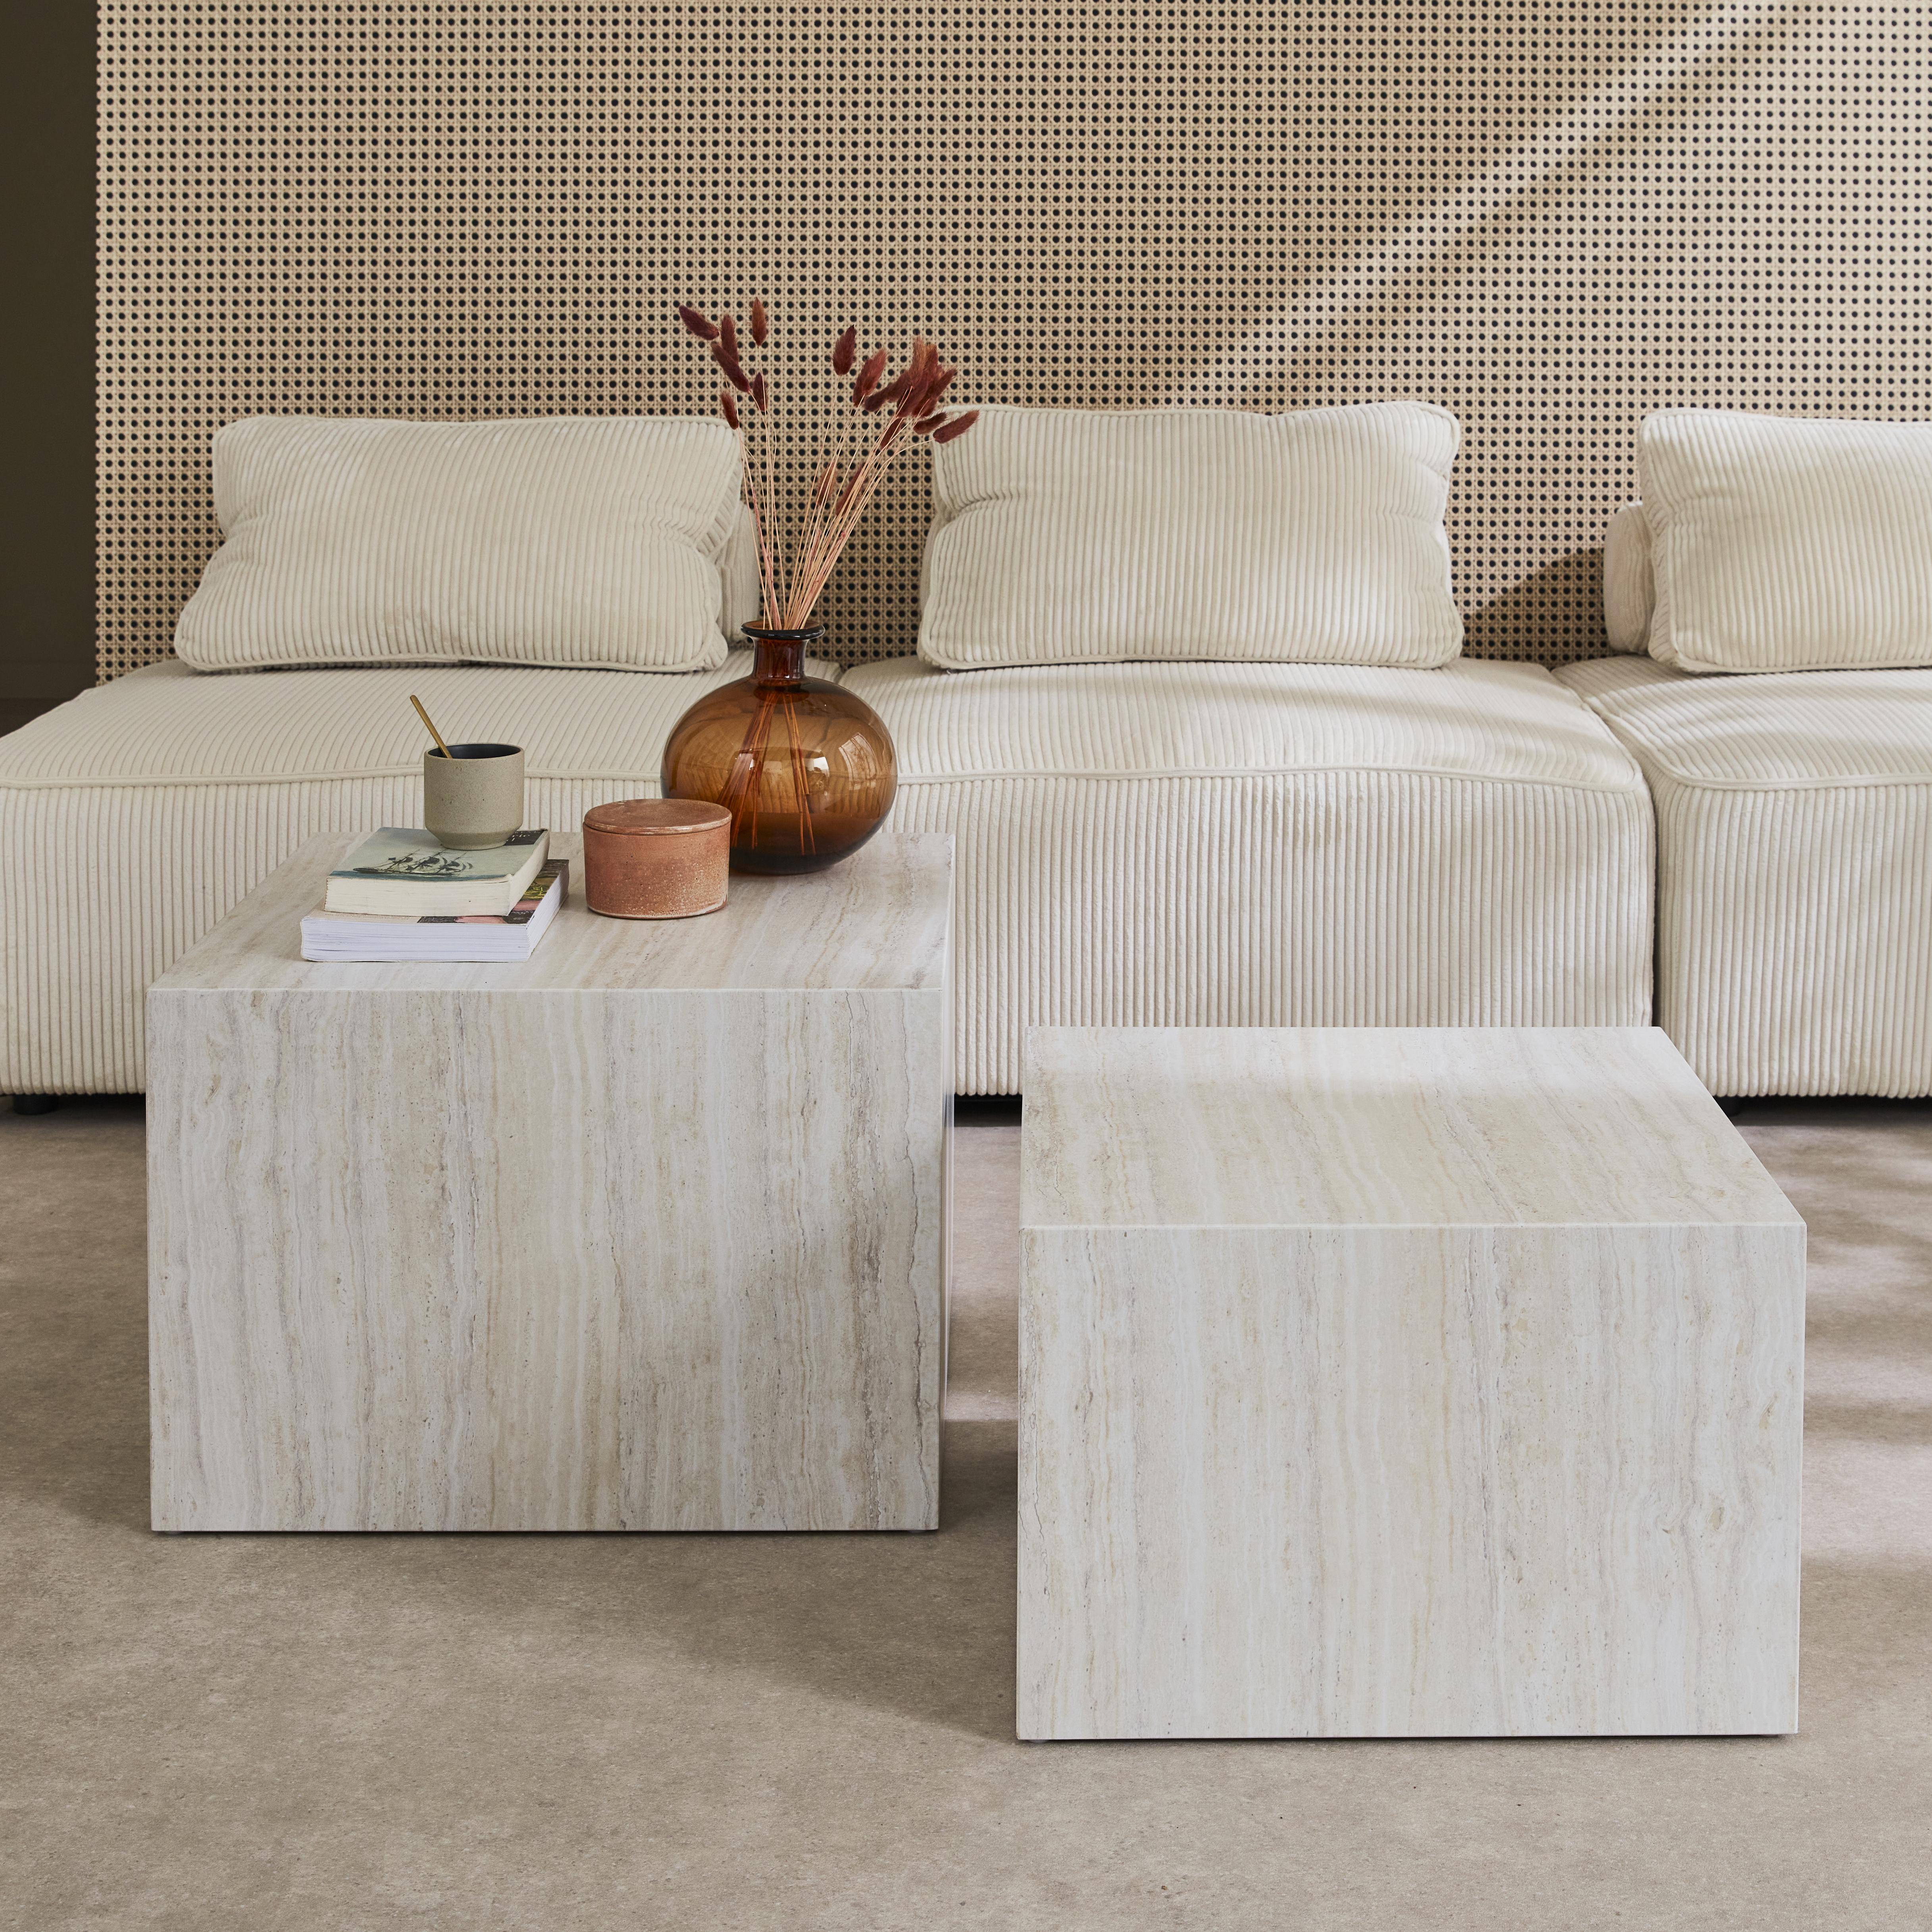 Set of 2 square coffee tables with marble effect, white, L50xW50xH33cm &  L58xW58xH40cm, Paros,sweeek,Photo1